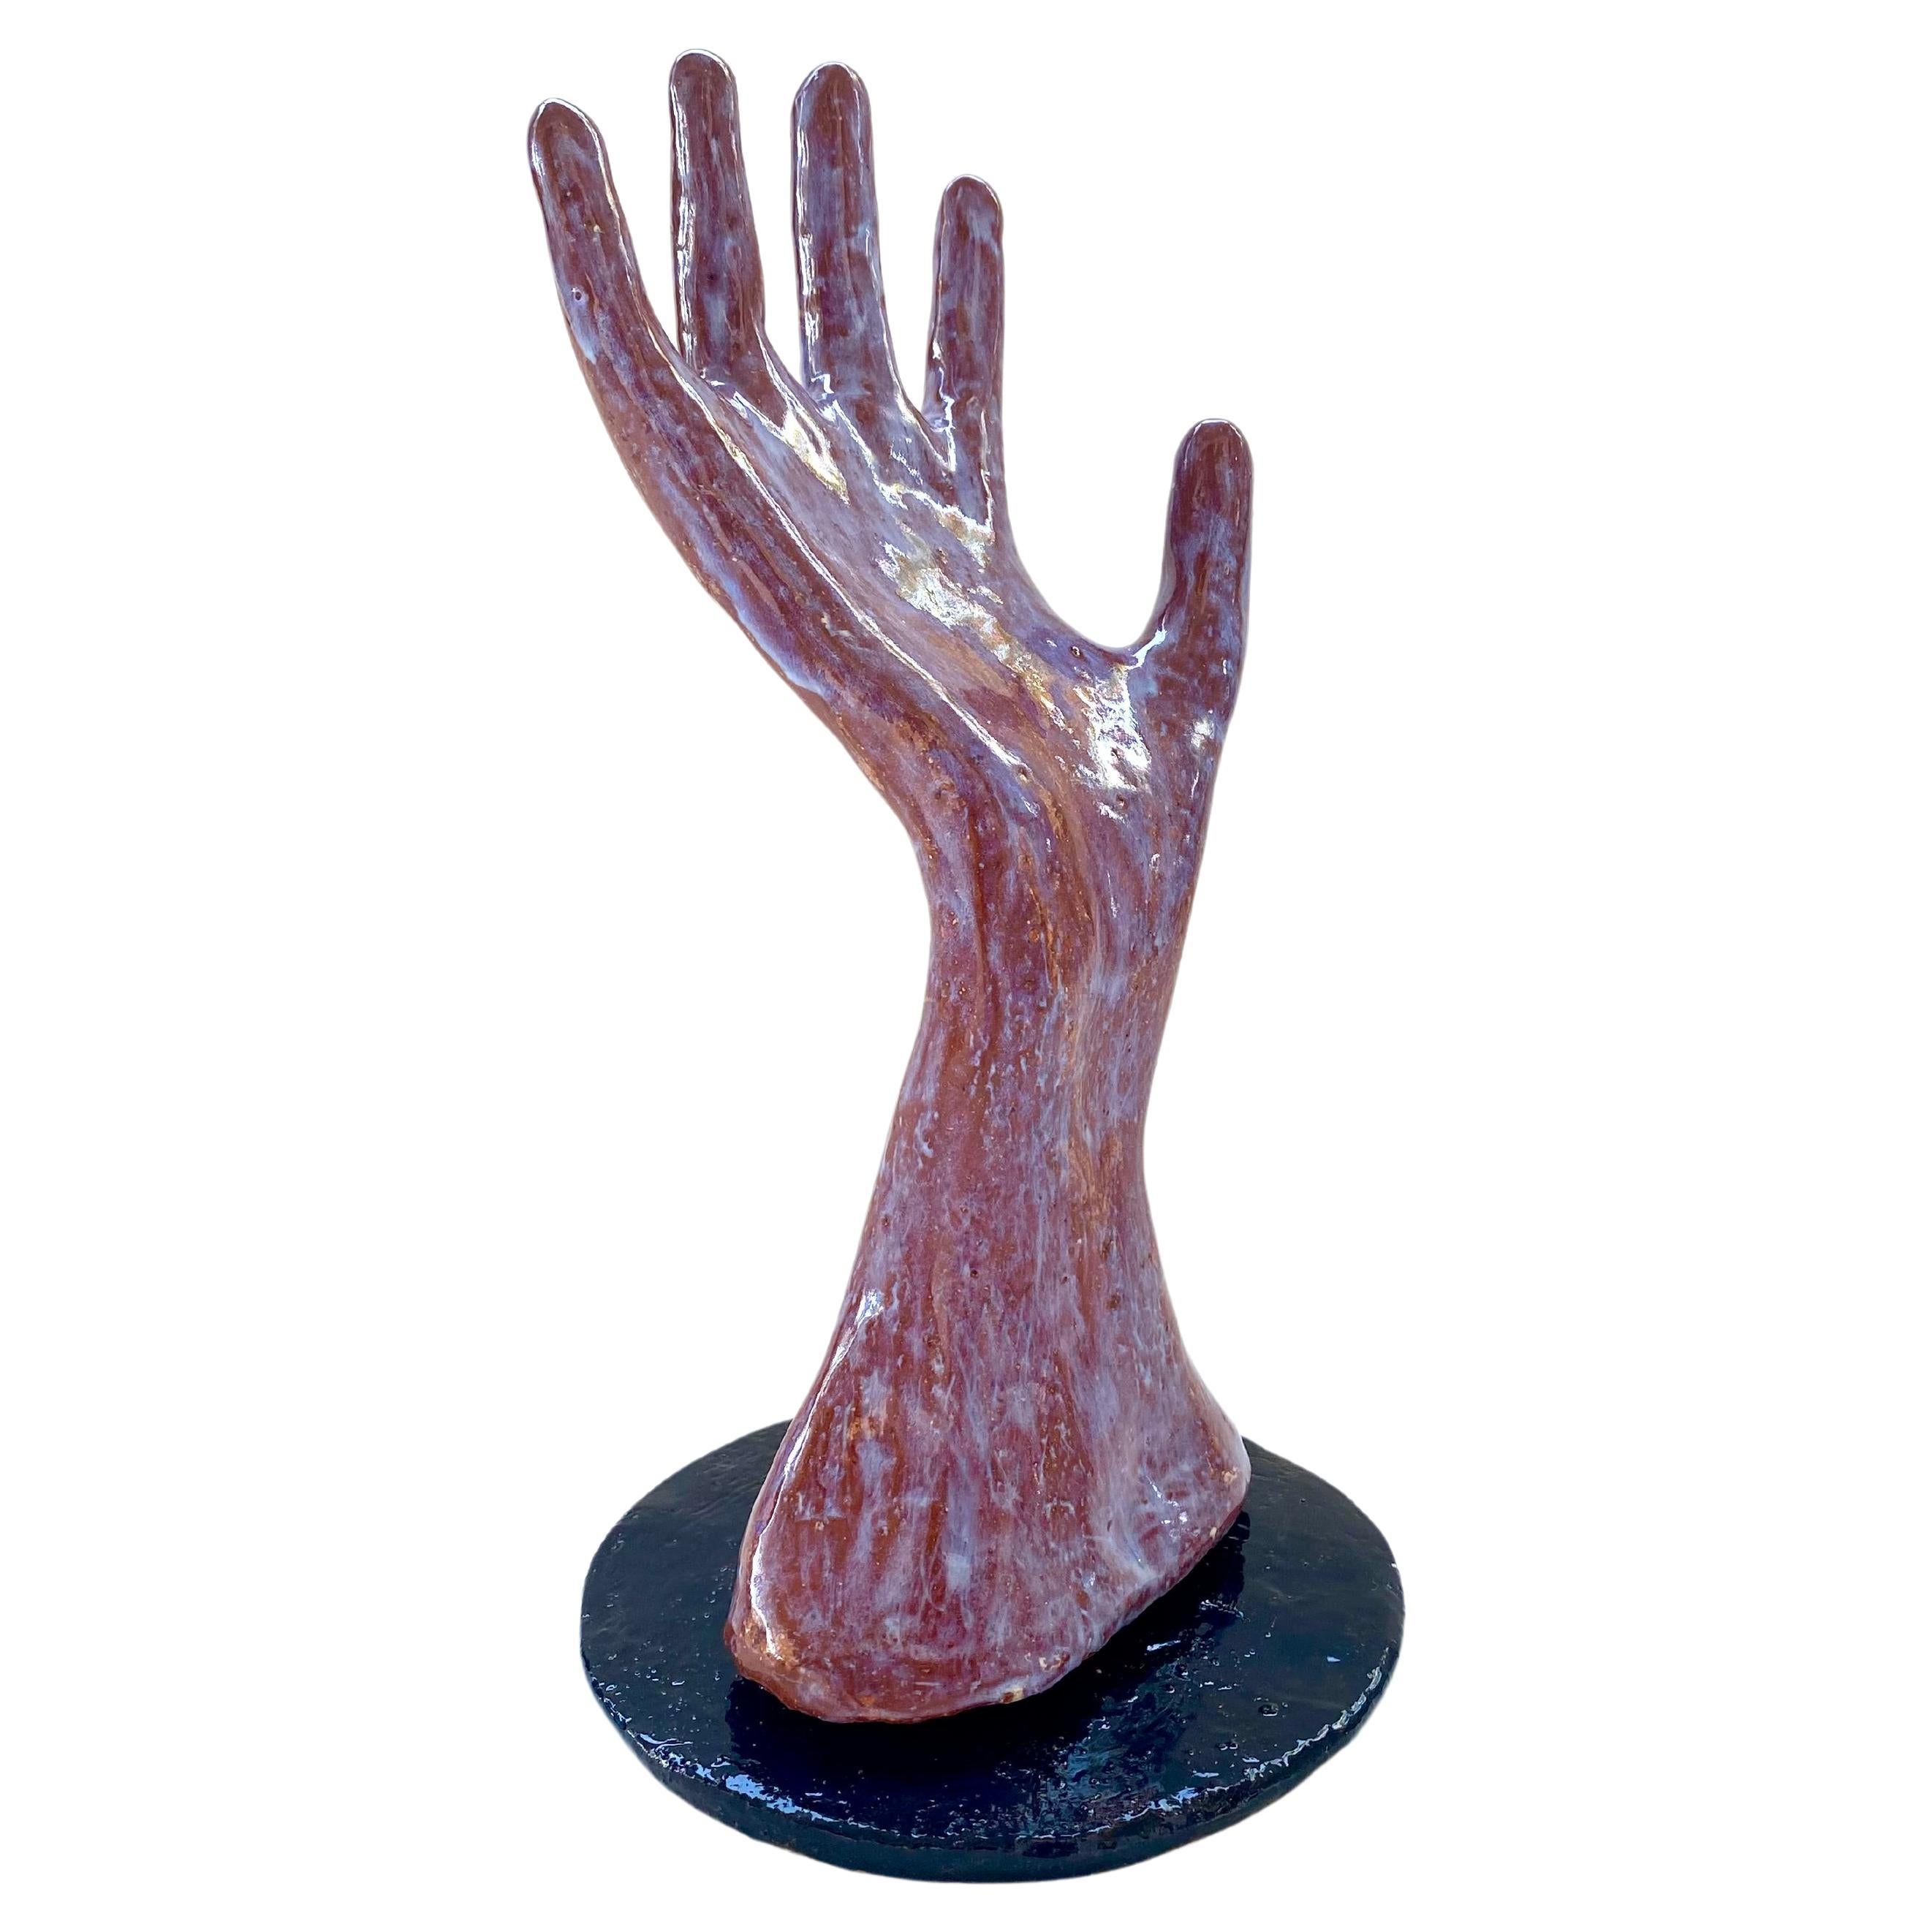 Hand Made Sculptural Glazed Ceramic Hand Jewelry Display Functional Art For Sale